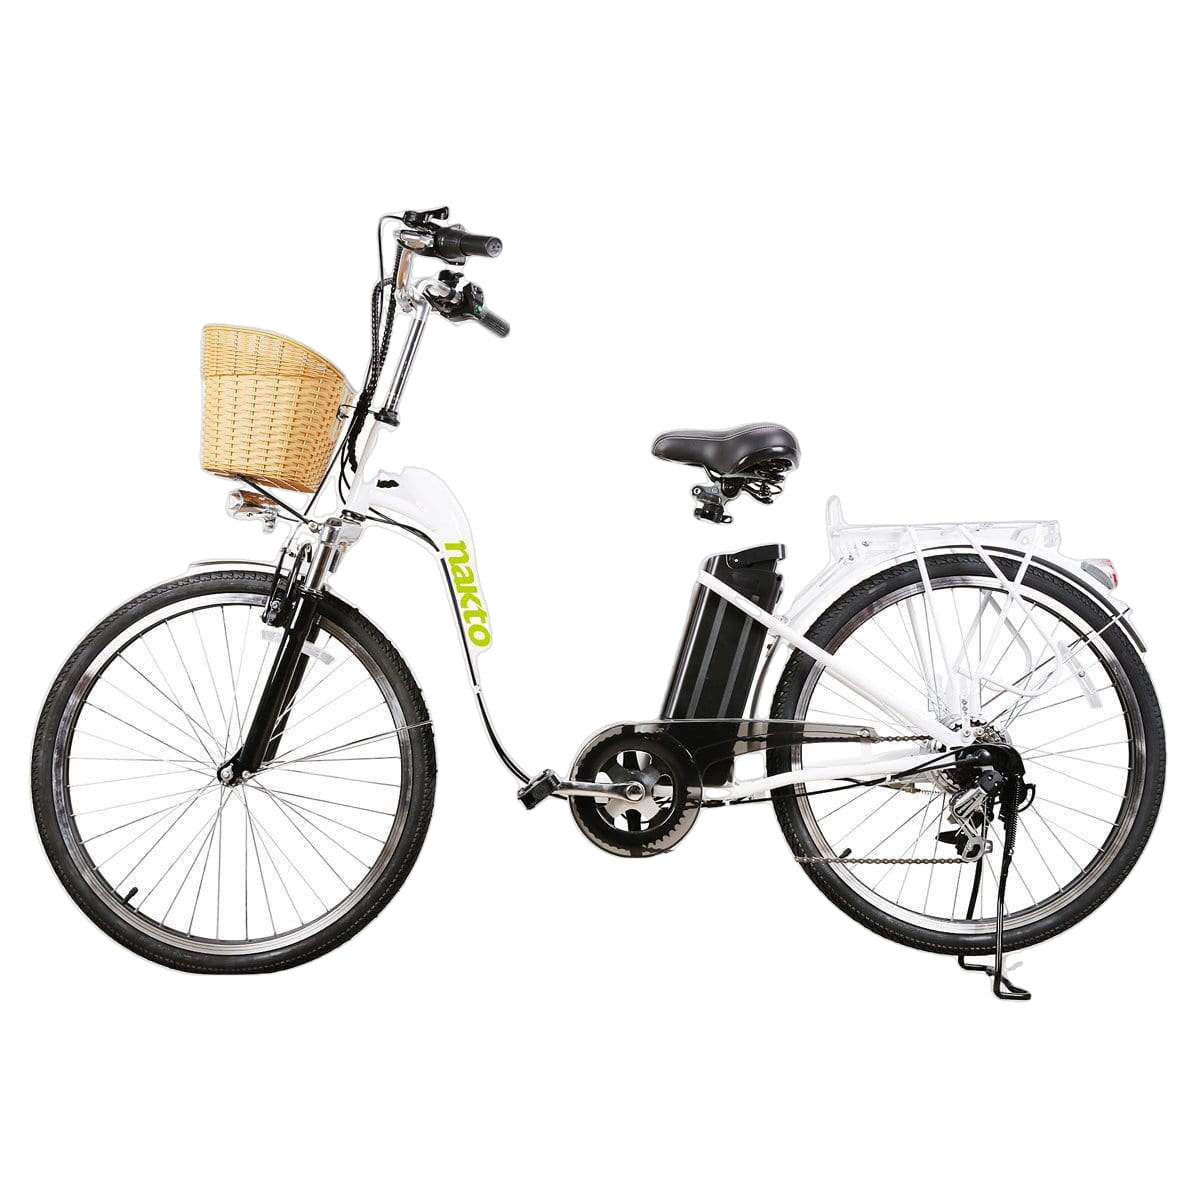 NAKTO 26 inch 250W Motor with Peak 350W 19 MPH Camel Electric Bicycle 6 Speed E-Bike 36V Lithium Battery Female/Young Adult White New